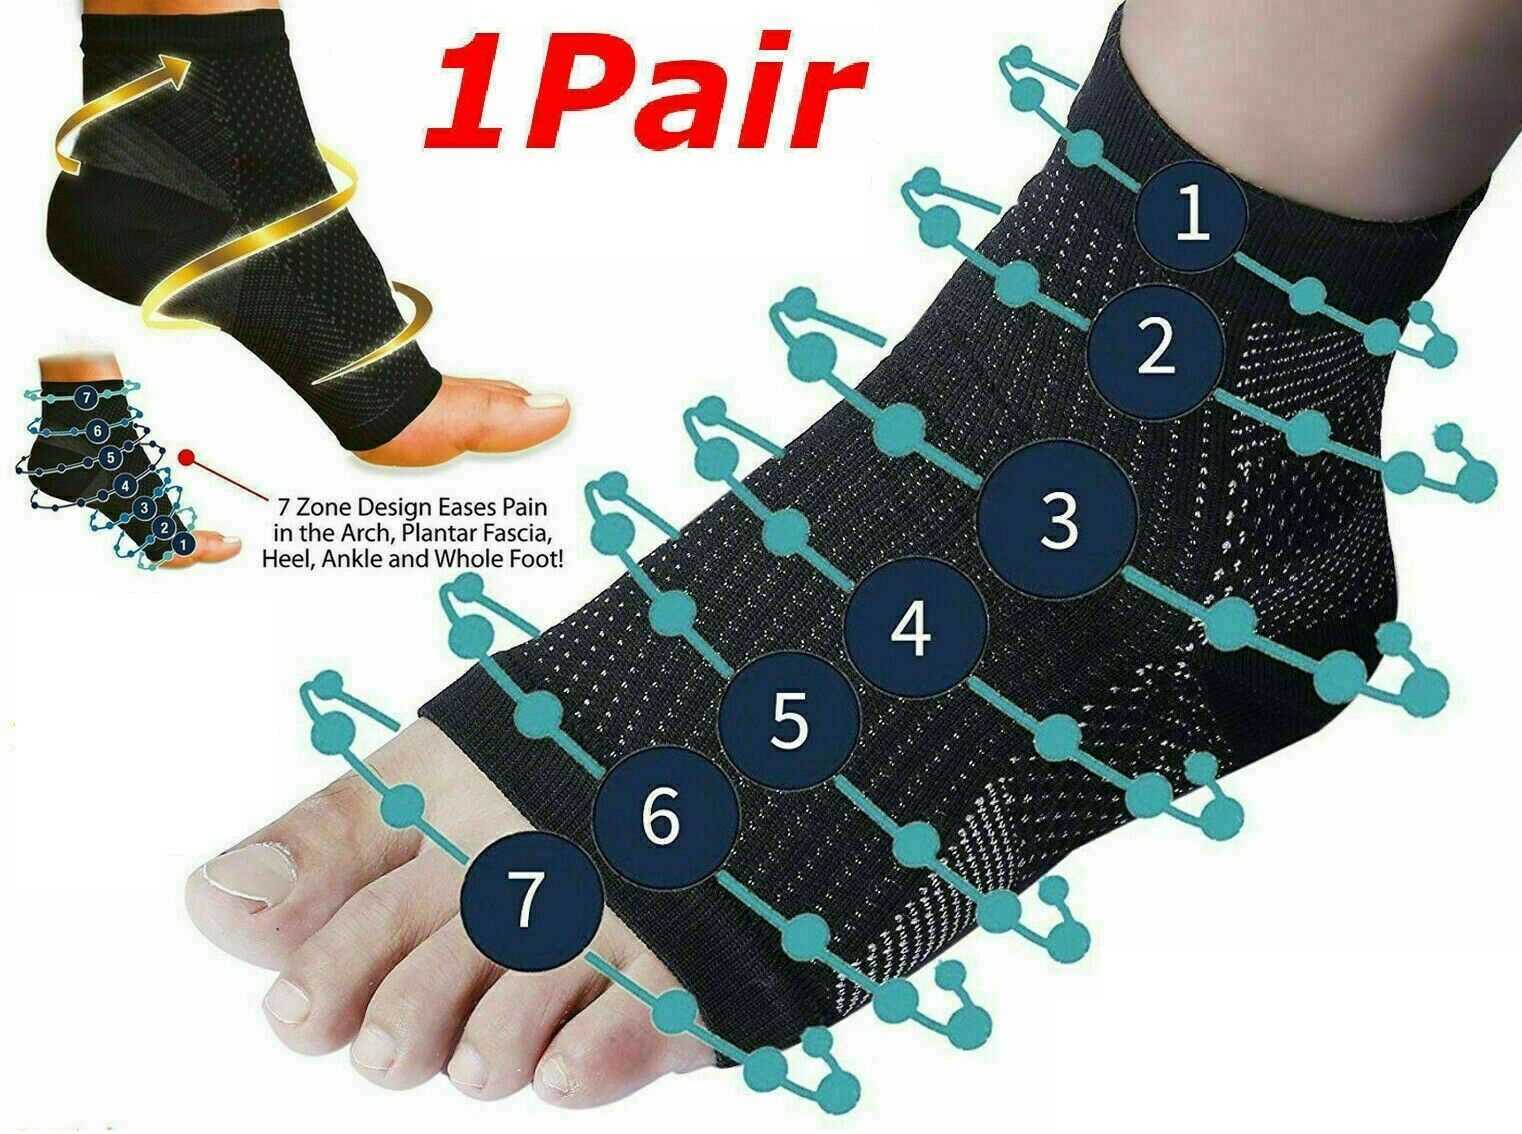 2 X Plantar Fasciitis Compression Socks Heel Foot Arch Pain Relief Support Pair Large And Extra Large